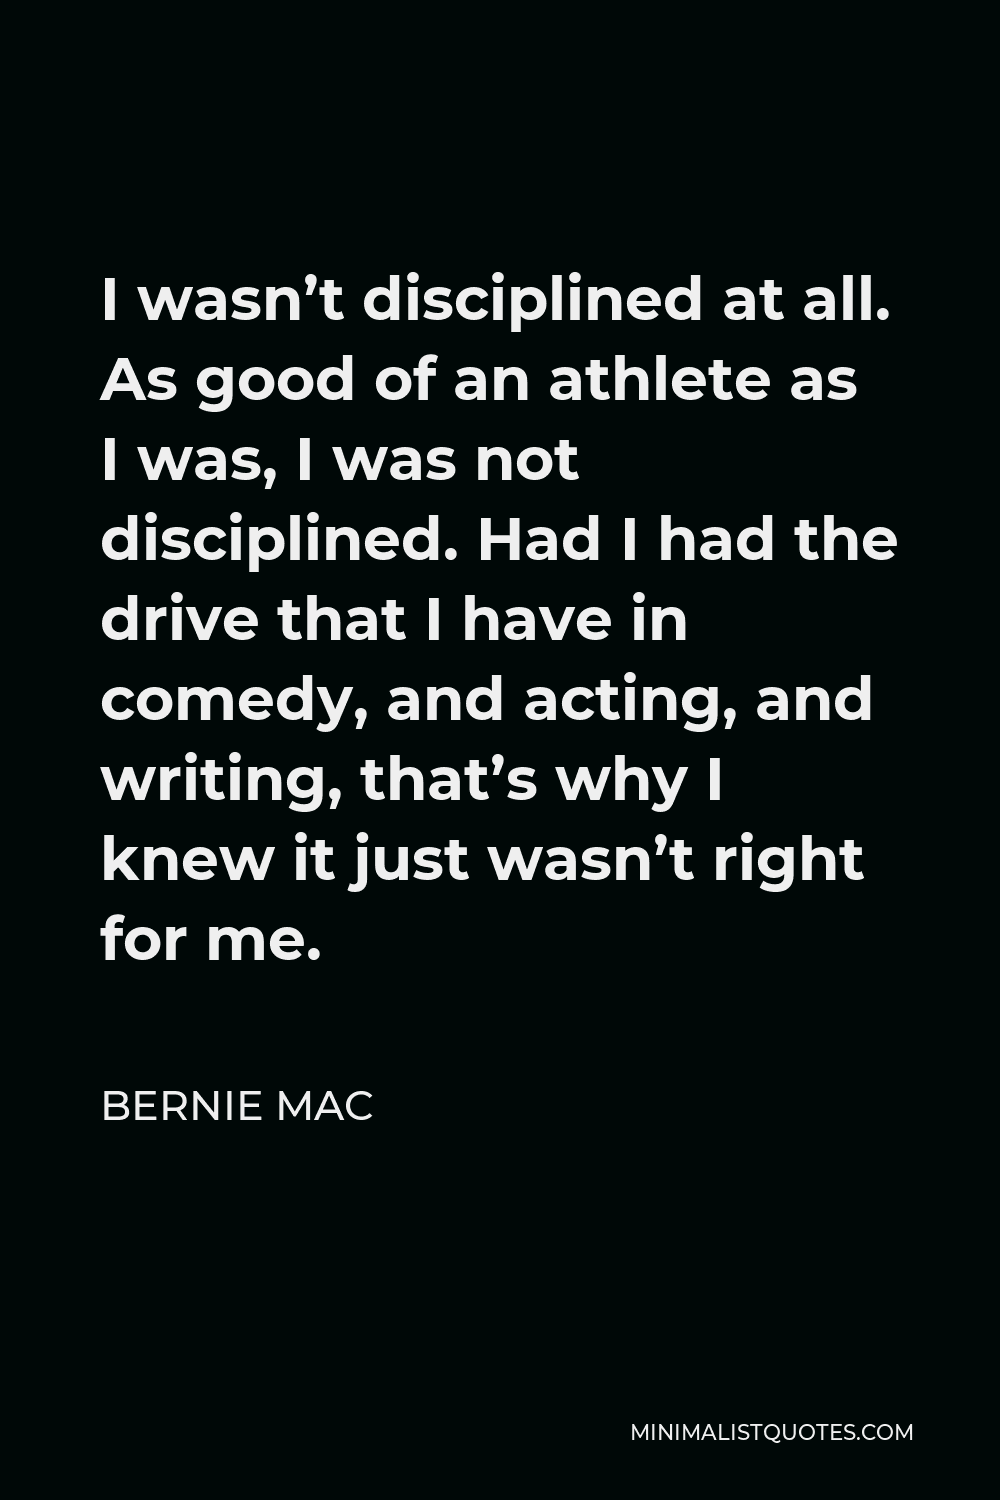 Bernie Mac Quote - I wasn’t disciplined at all. As good of an athlete as I was, I was not disciplined. Had I had the drive that I have in comedy, and acting, and writing, that’s why I knew it just wasn’t right for me.